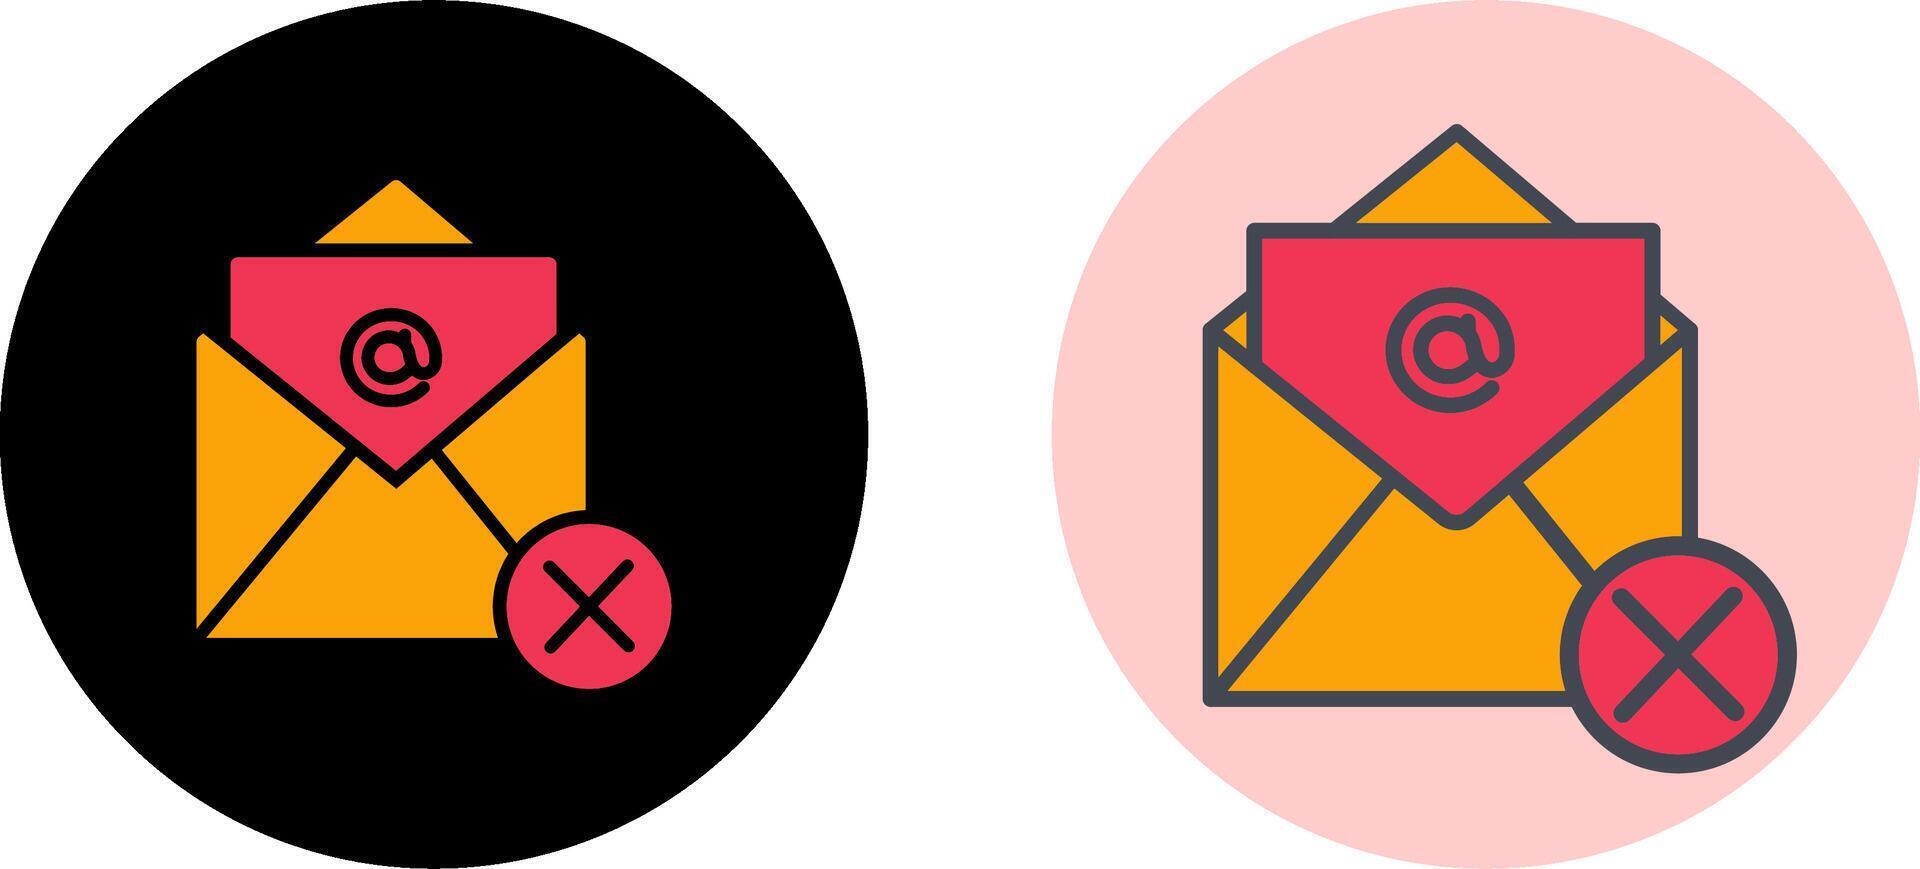 Not Accepted Icon Design vector